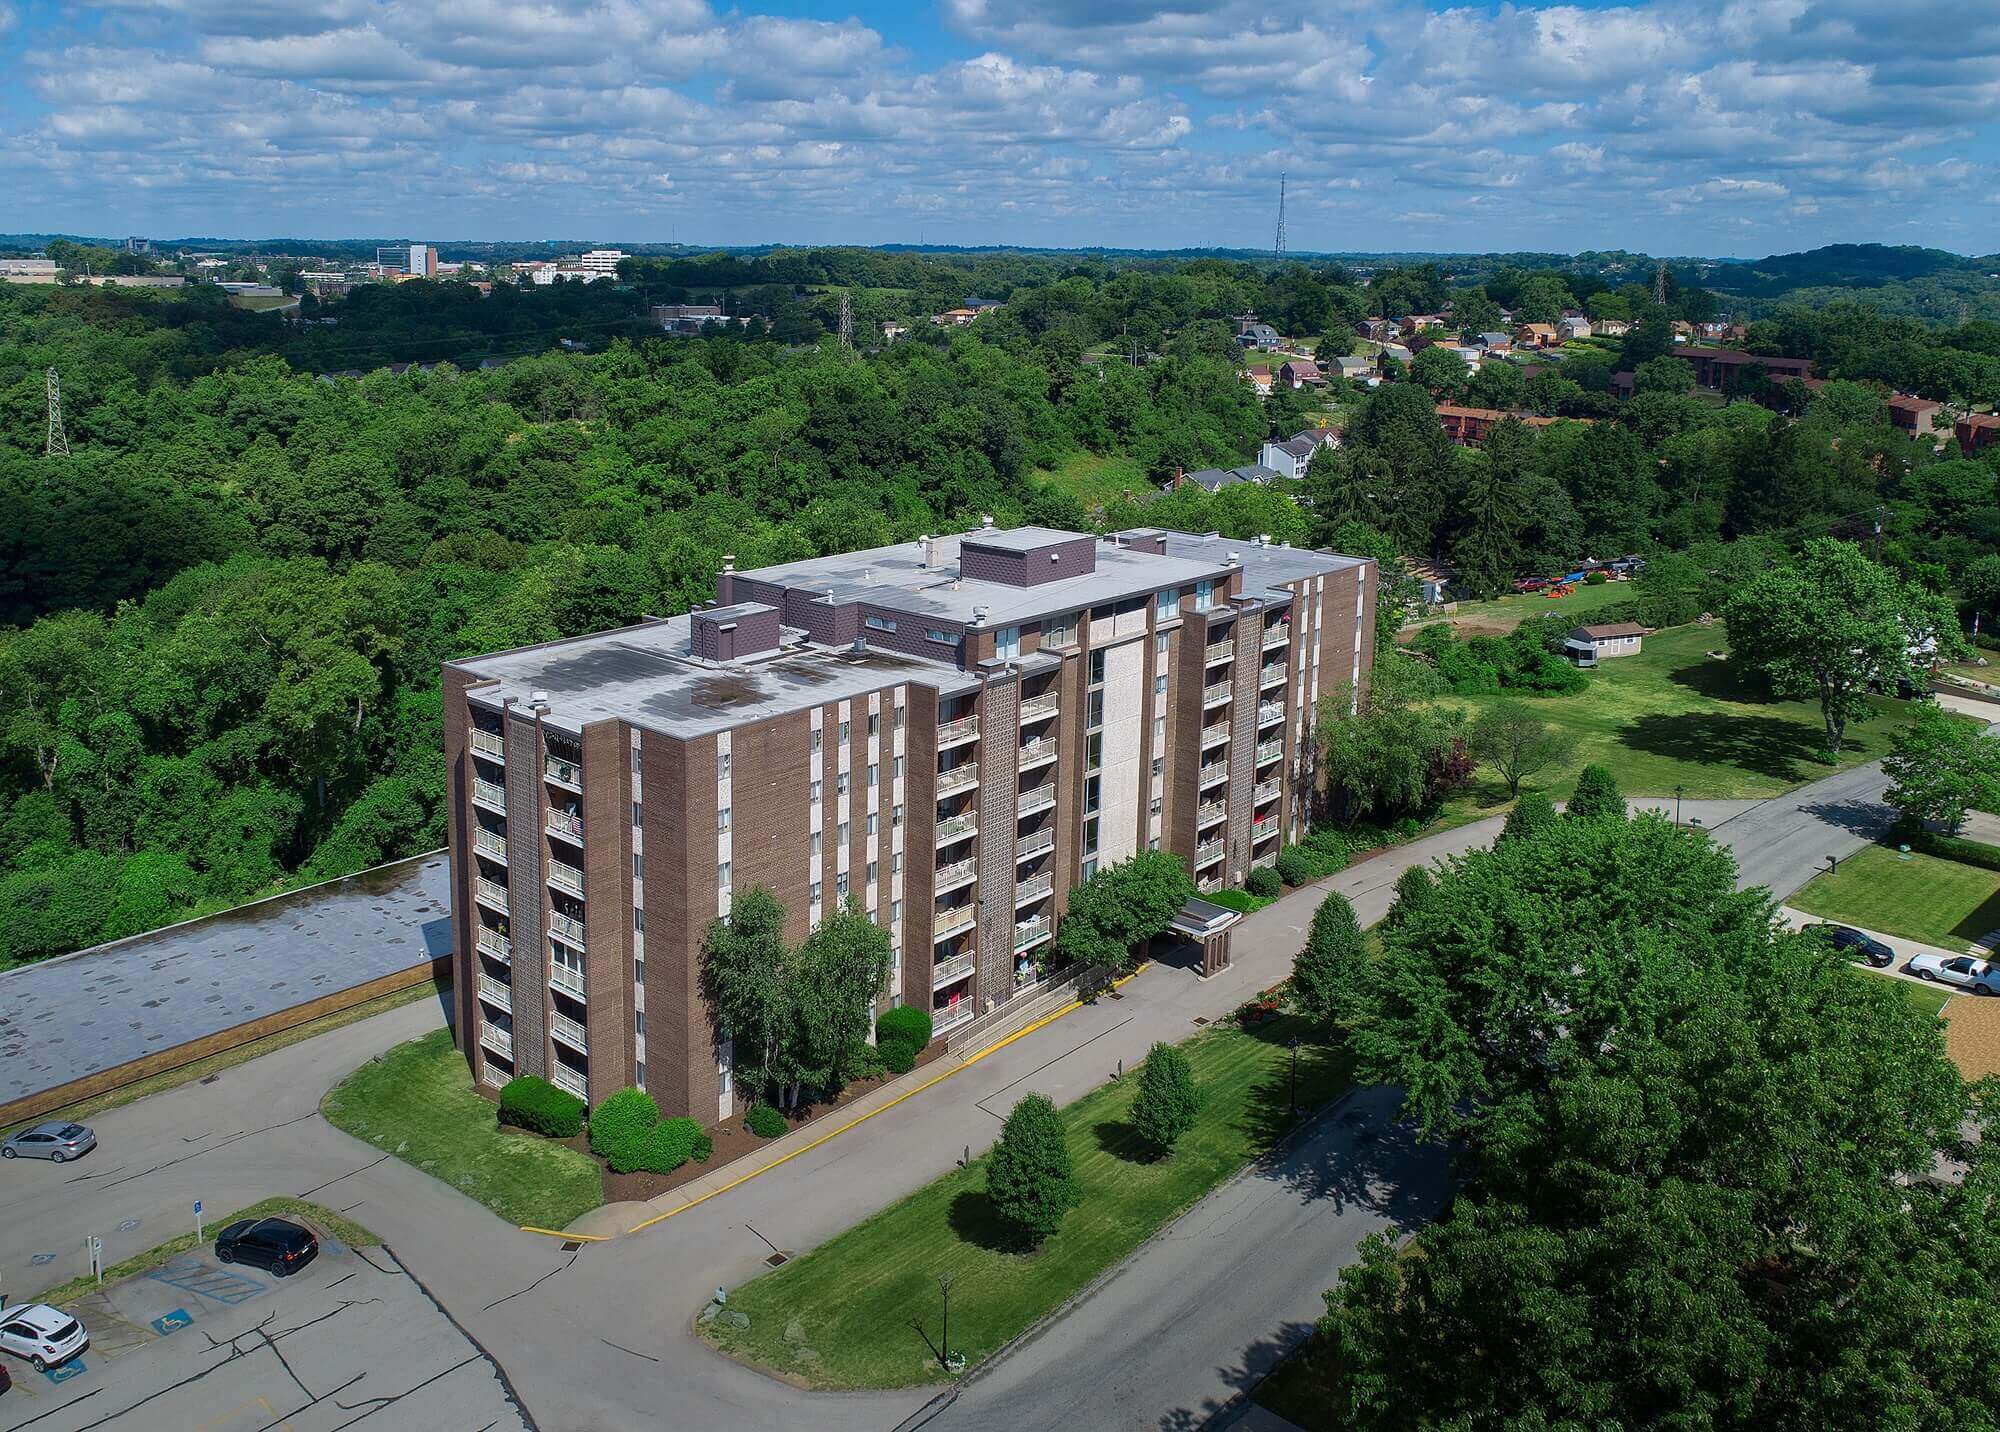 Aerial View at Lavale Apartments, Monroeville, Pennsylvania